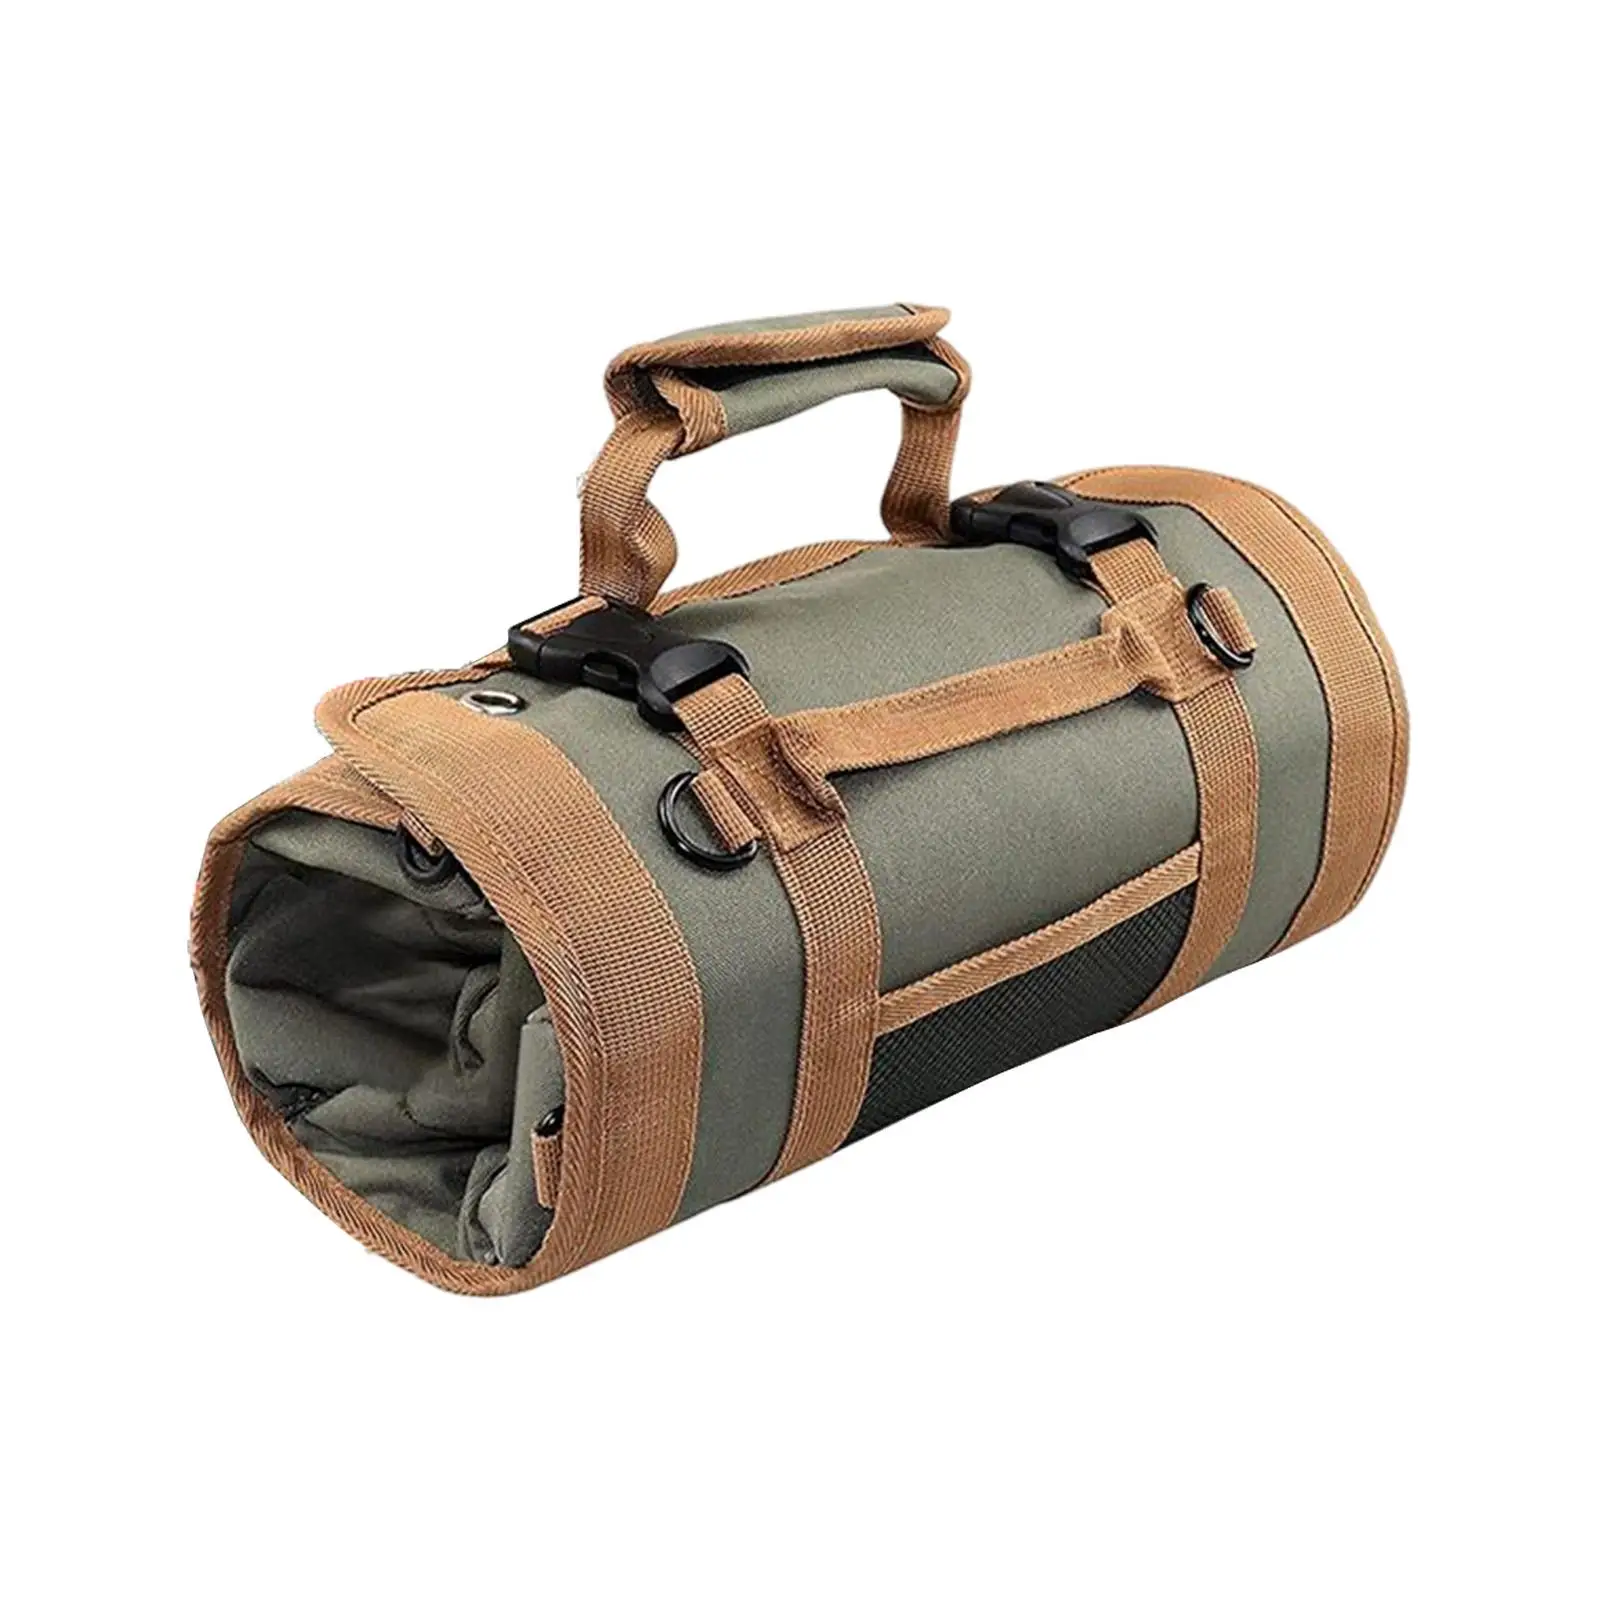 Oxford Cloth Small Tool Pouches Roll up Multifunctional Case Carry Case Small Tool Bag Organizer Storage for Home Dad Gifts